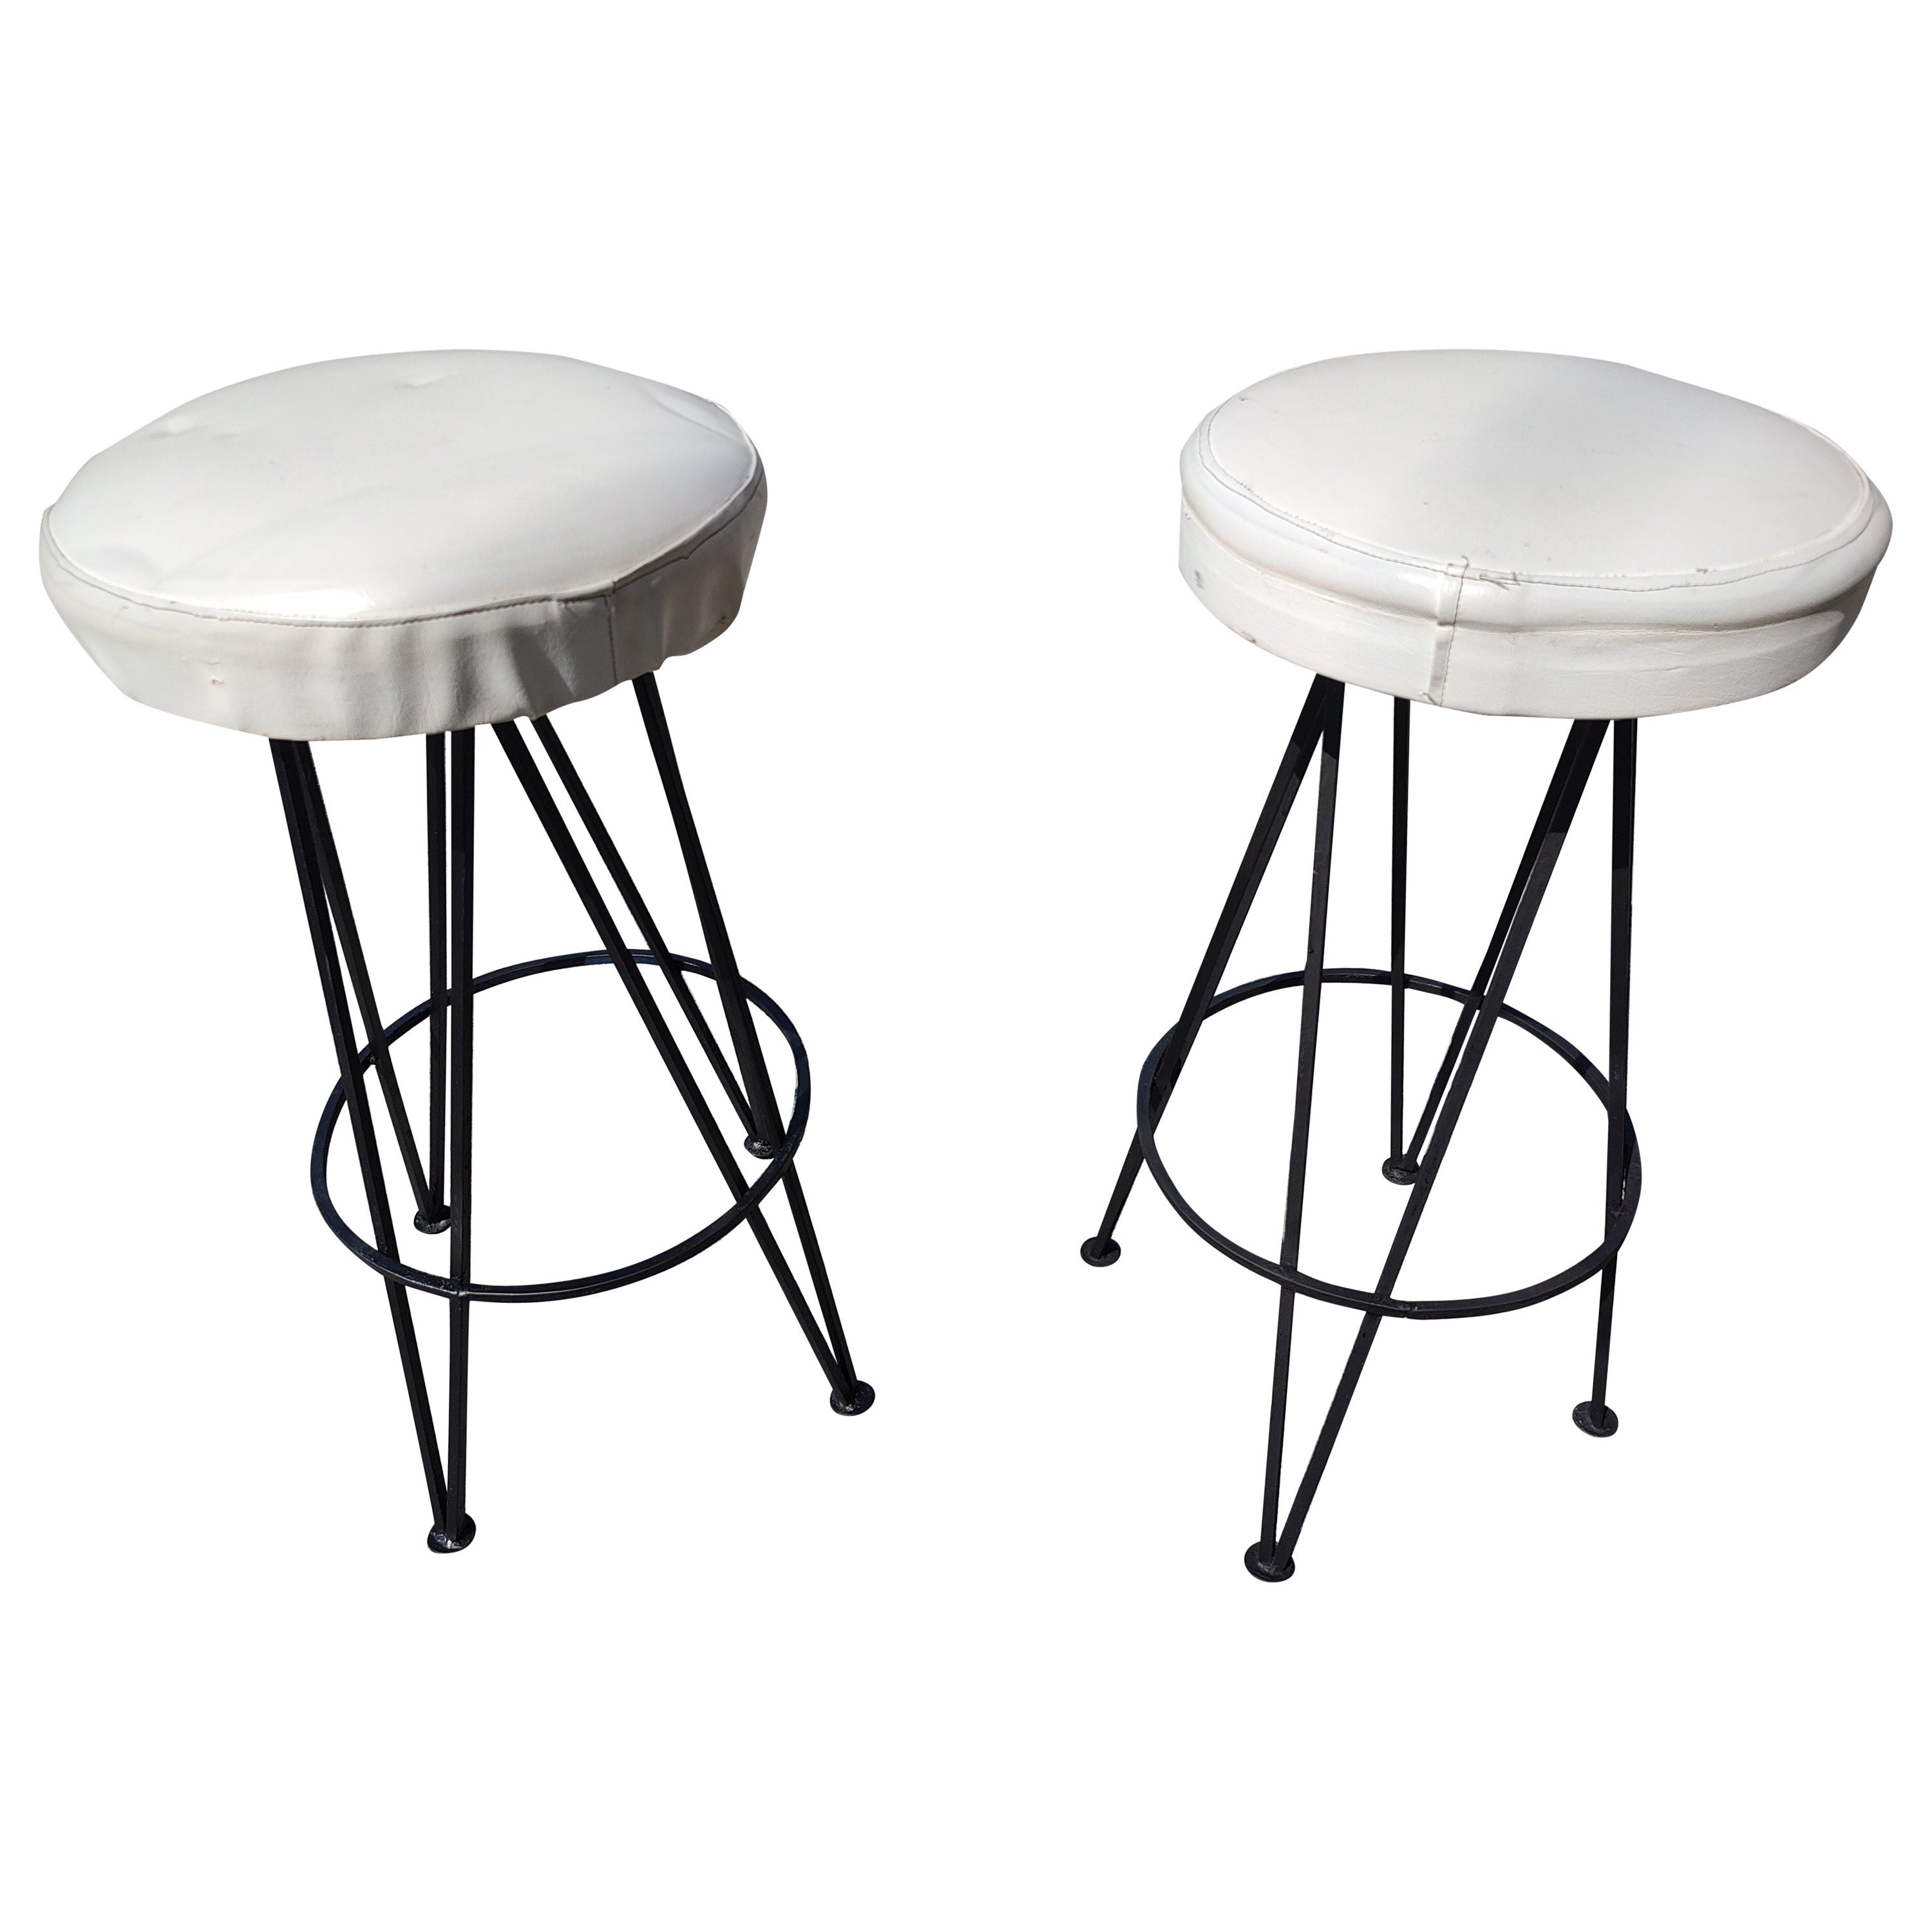 Pryamid shaped iron bases with round swiveling stools atop covered in naugahyde white fabric. A few are dark blue vinyl. Iron has been just been recently sprayed. In excellent vintage condition with minimal wear. Seat covering could use an upgrade.